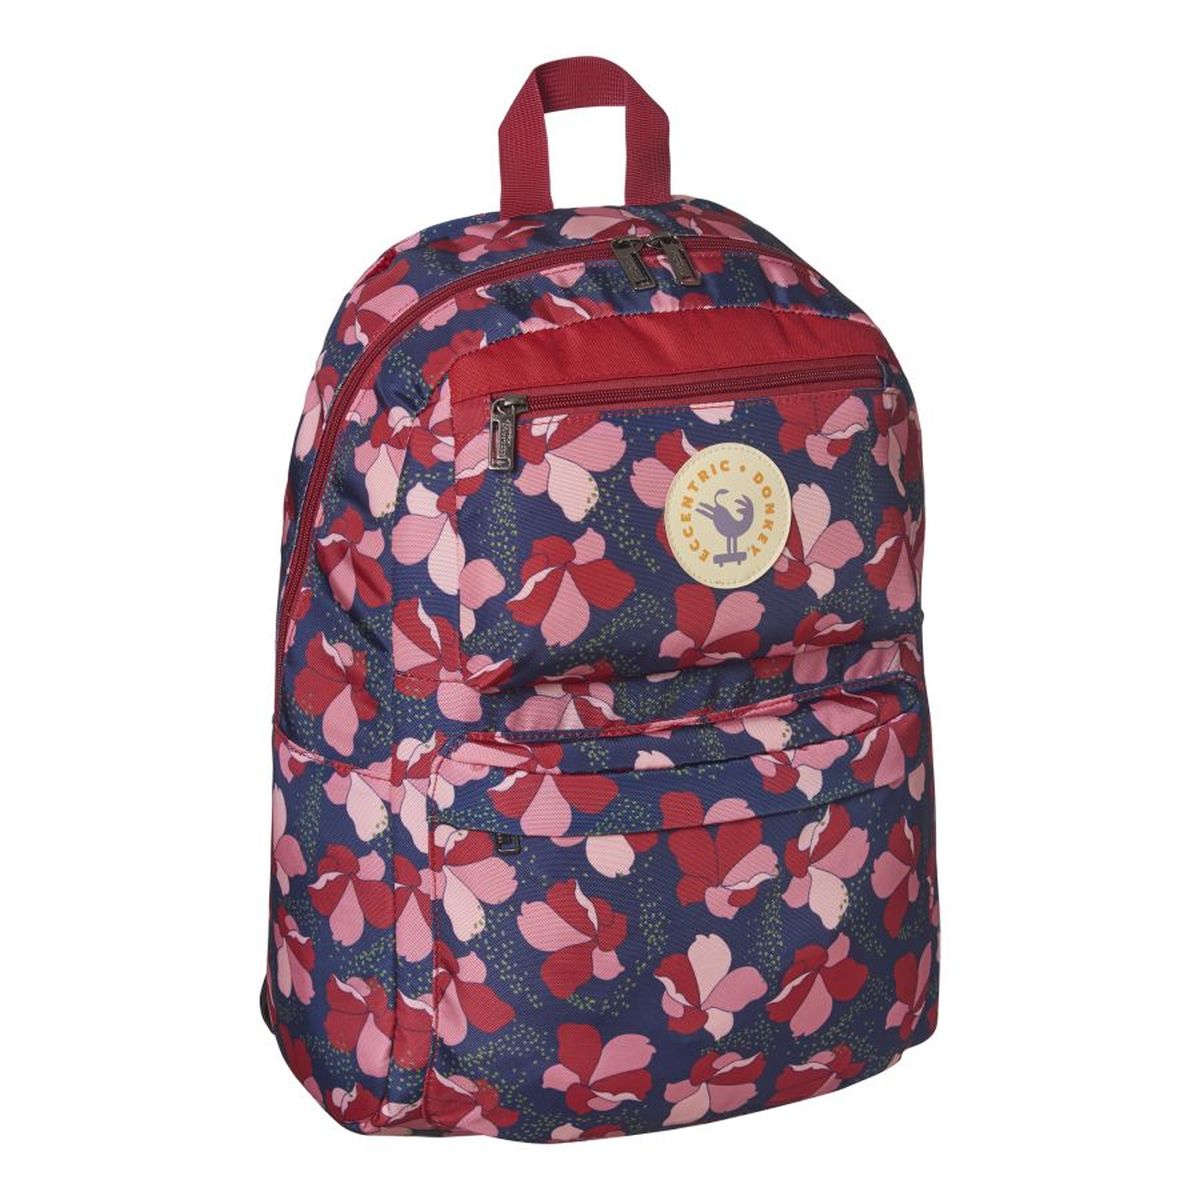 Backpack Poitou Trends Floral Blossom